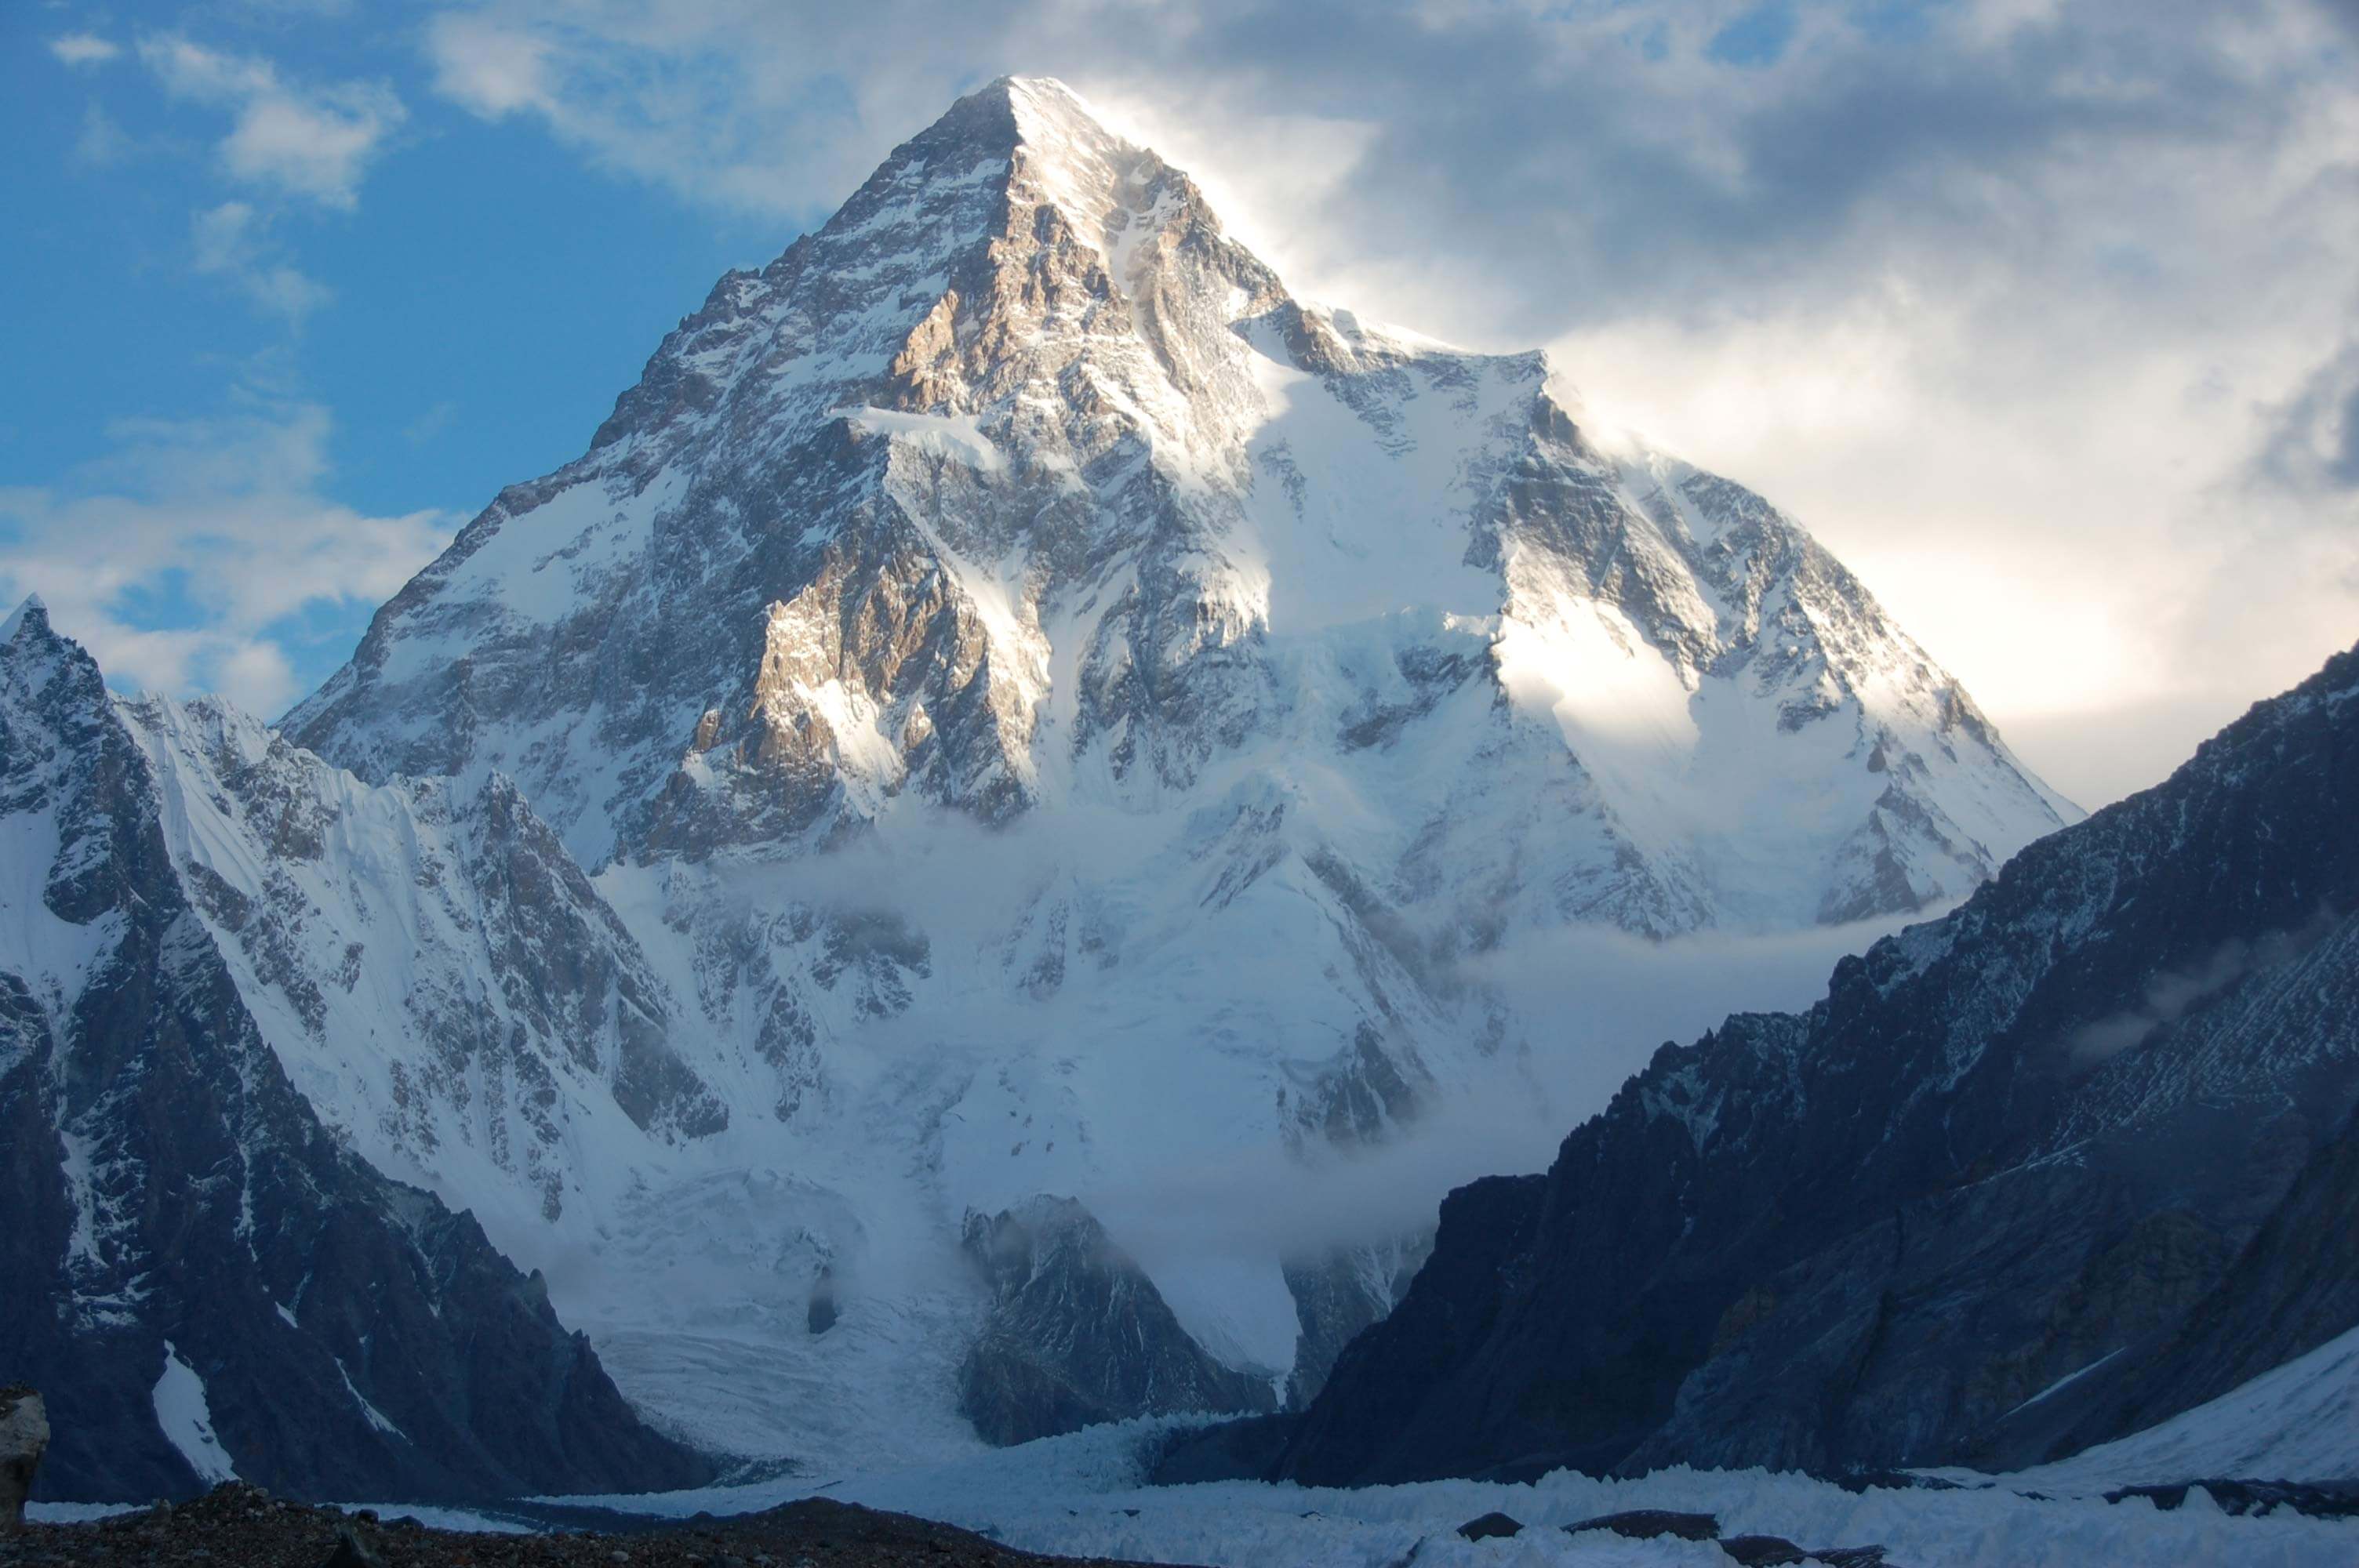 Interesting facts about Mount K2